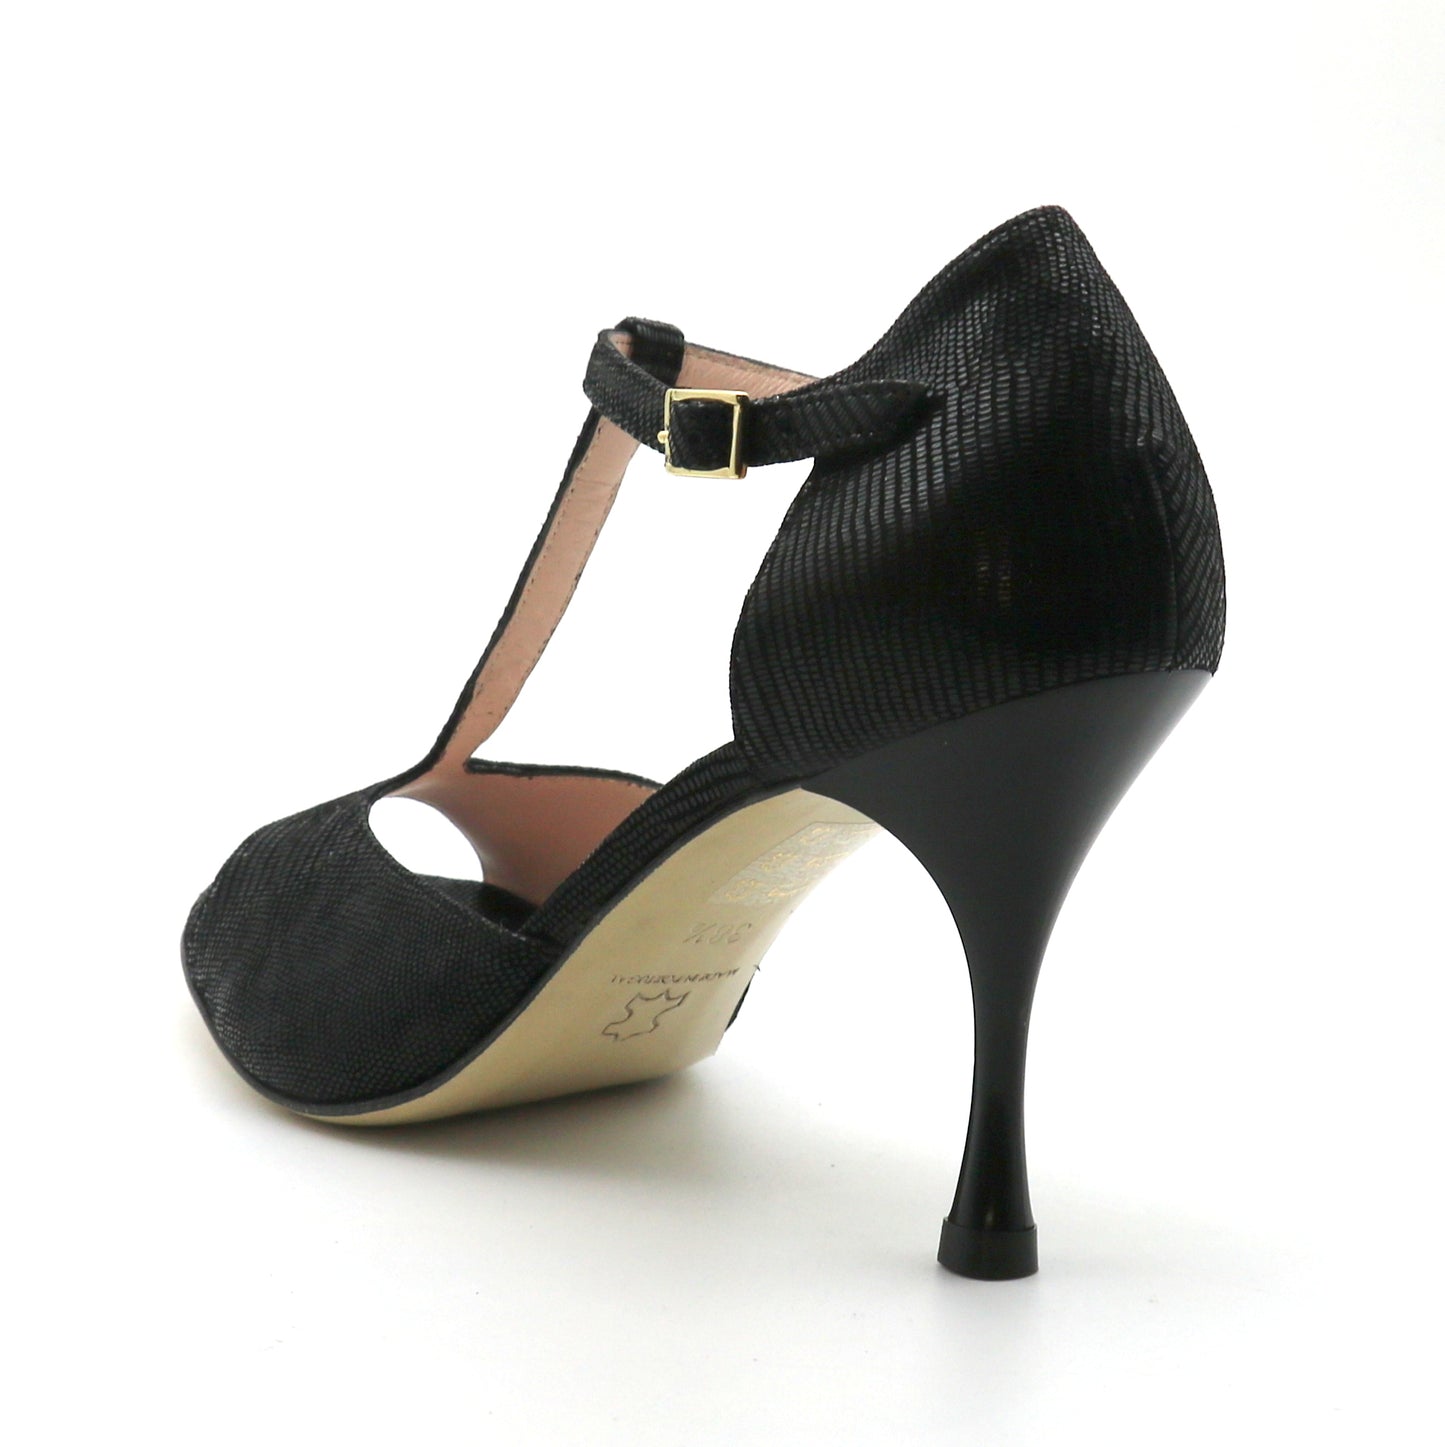 Chico Black snake effect lacquered heels 8cm 